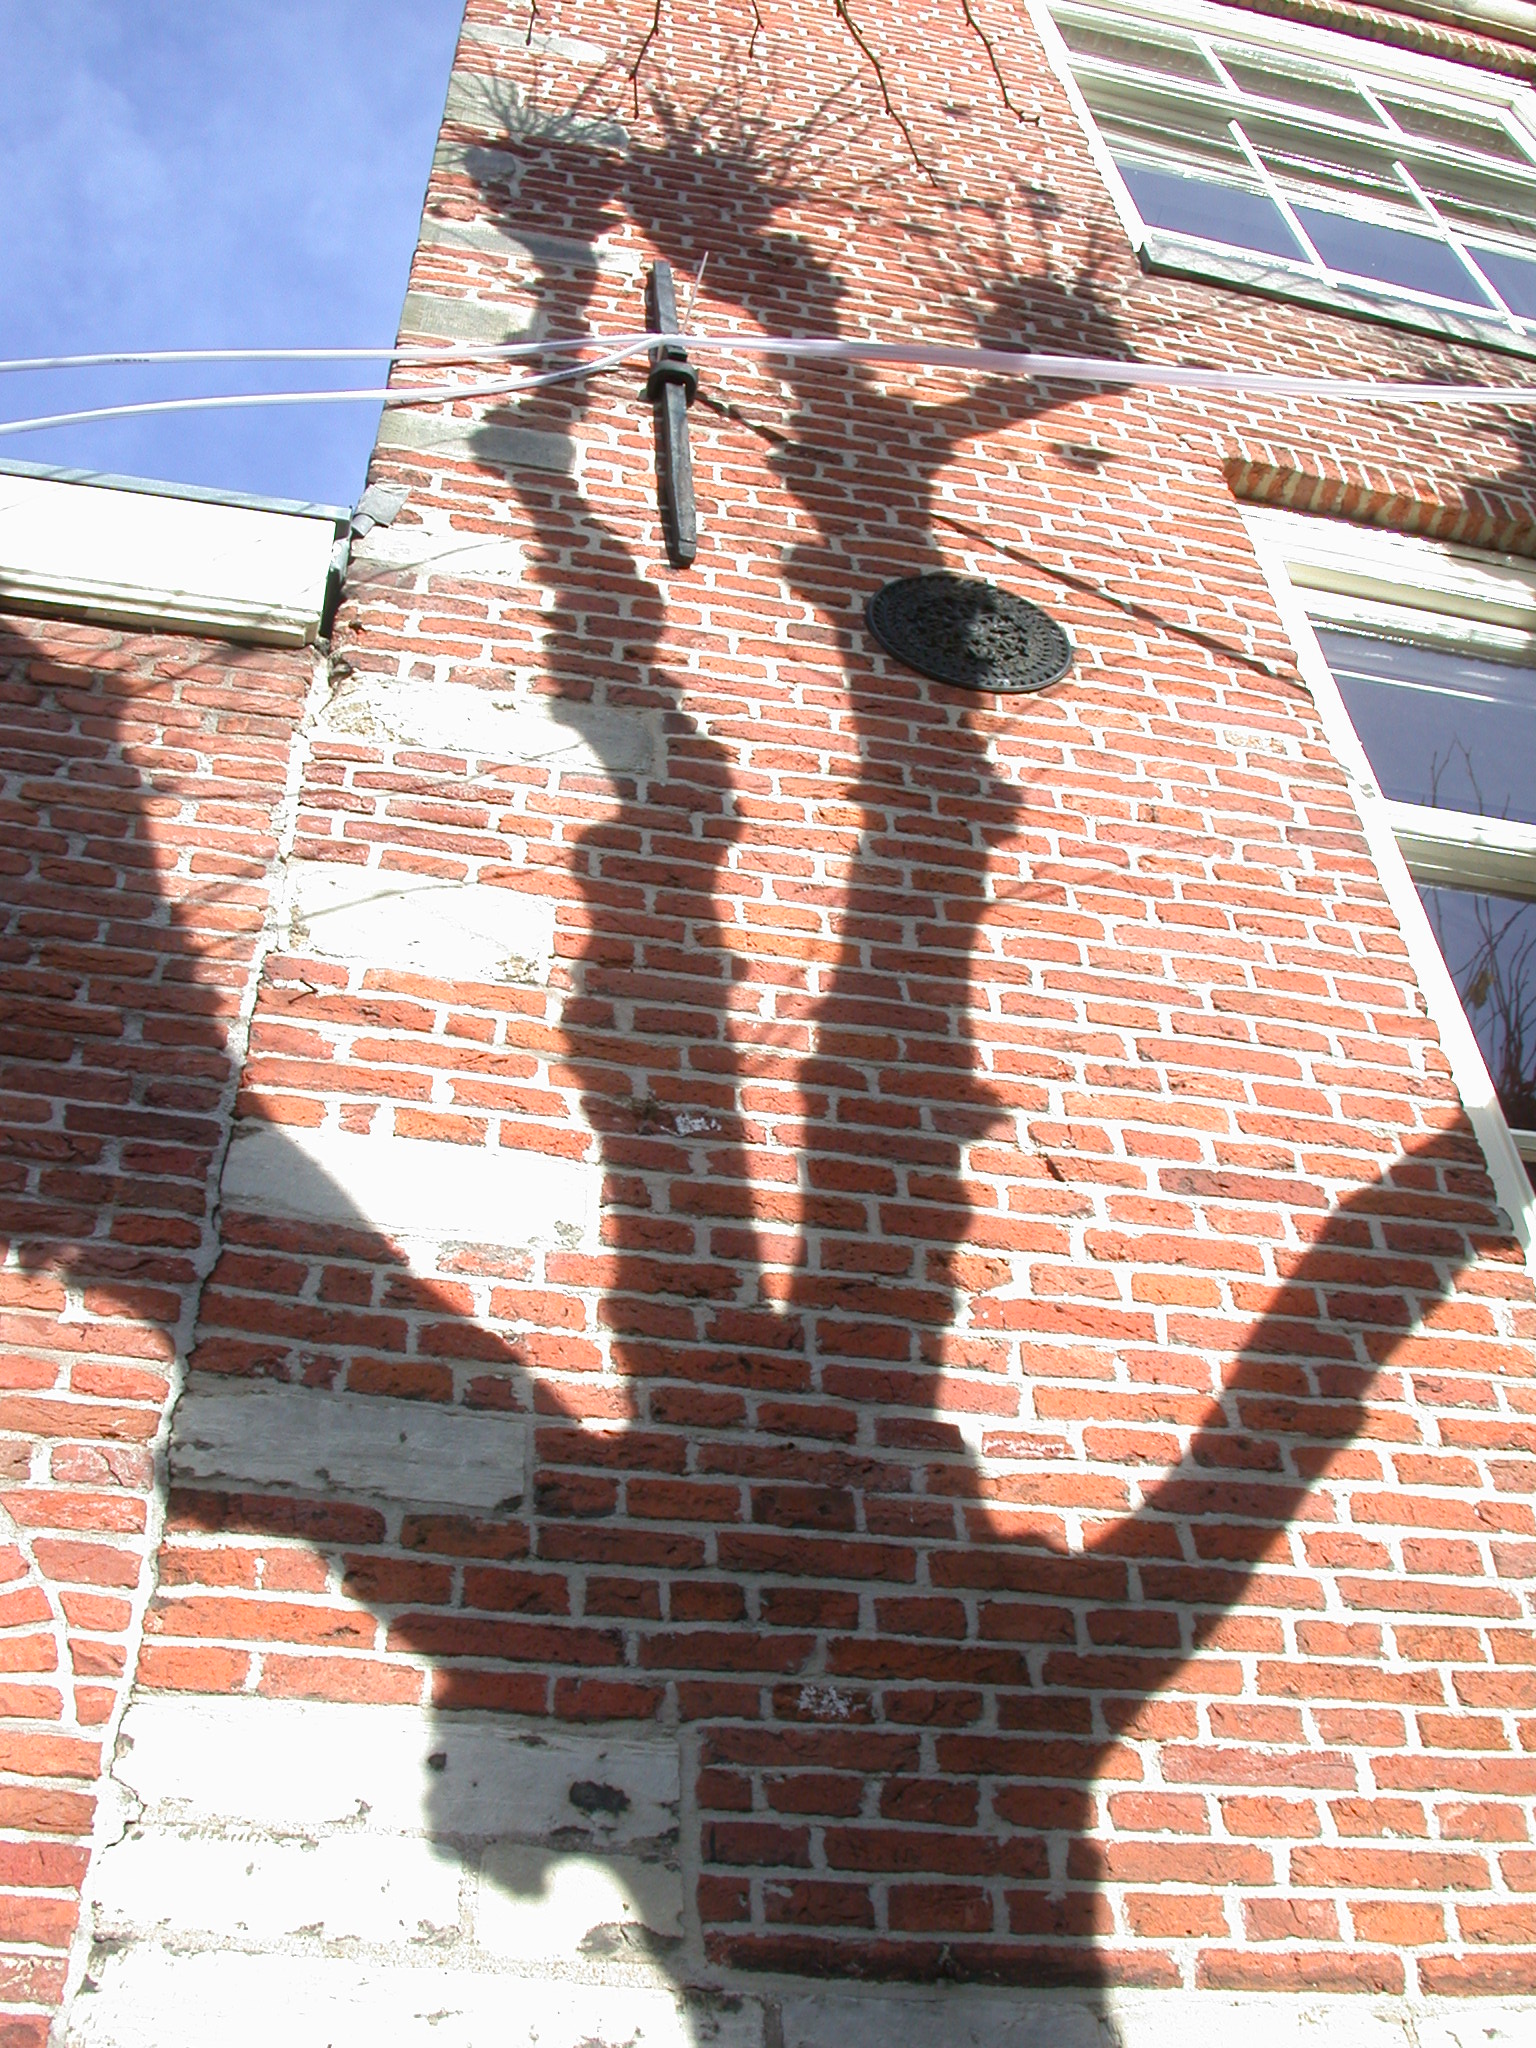 shadow of a tree on a house